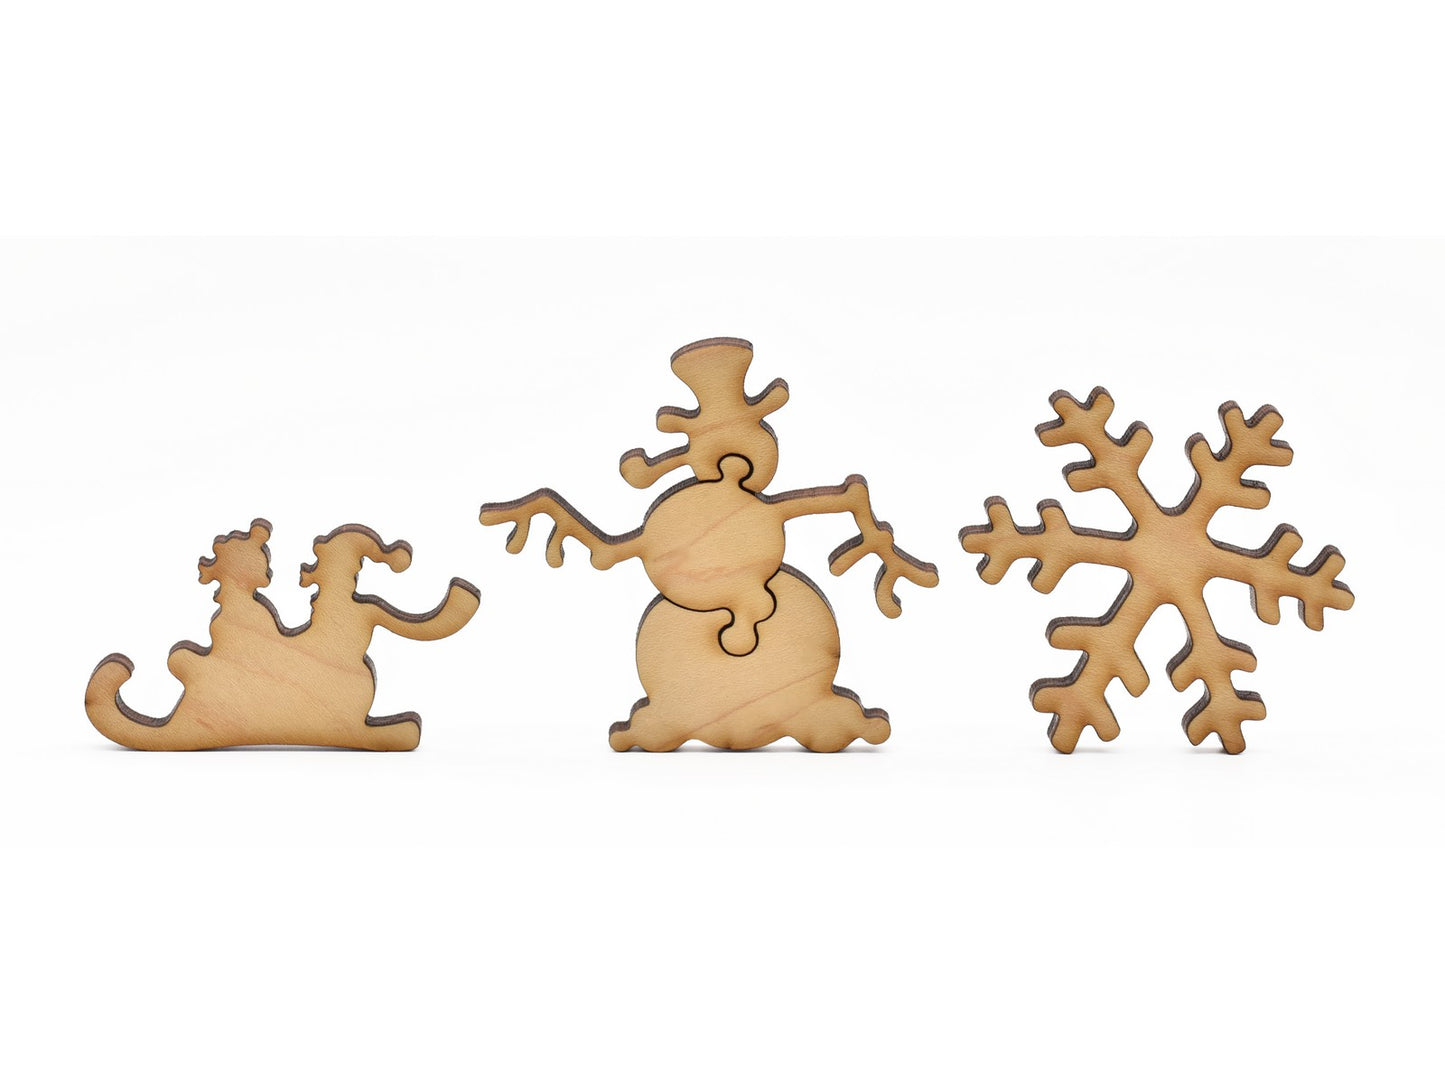 A closeup of pieces in the shape of a sled, a snowman, and a snowflake.